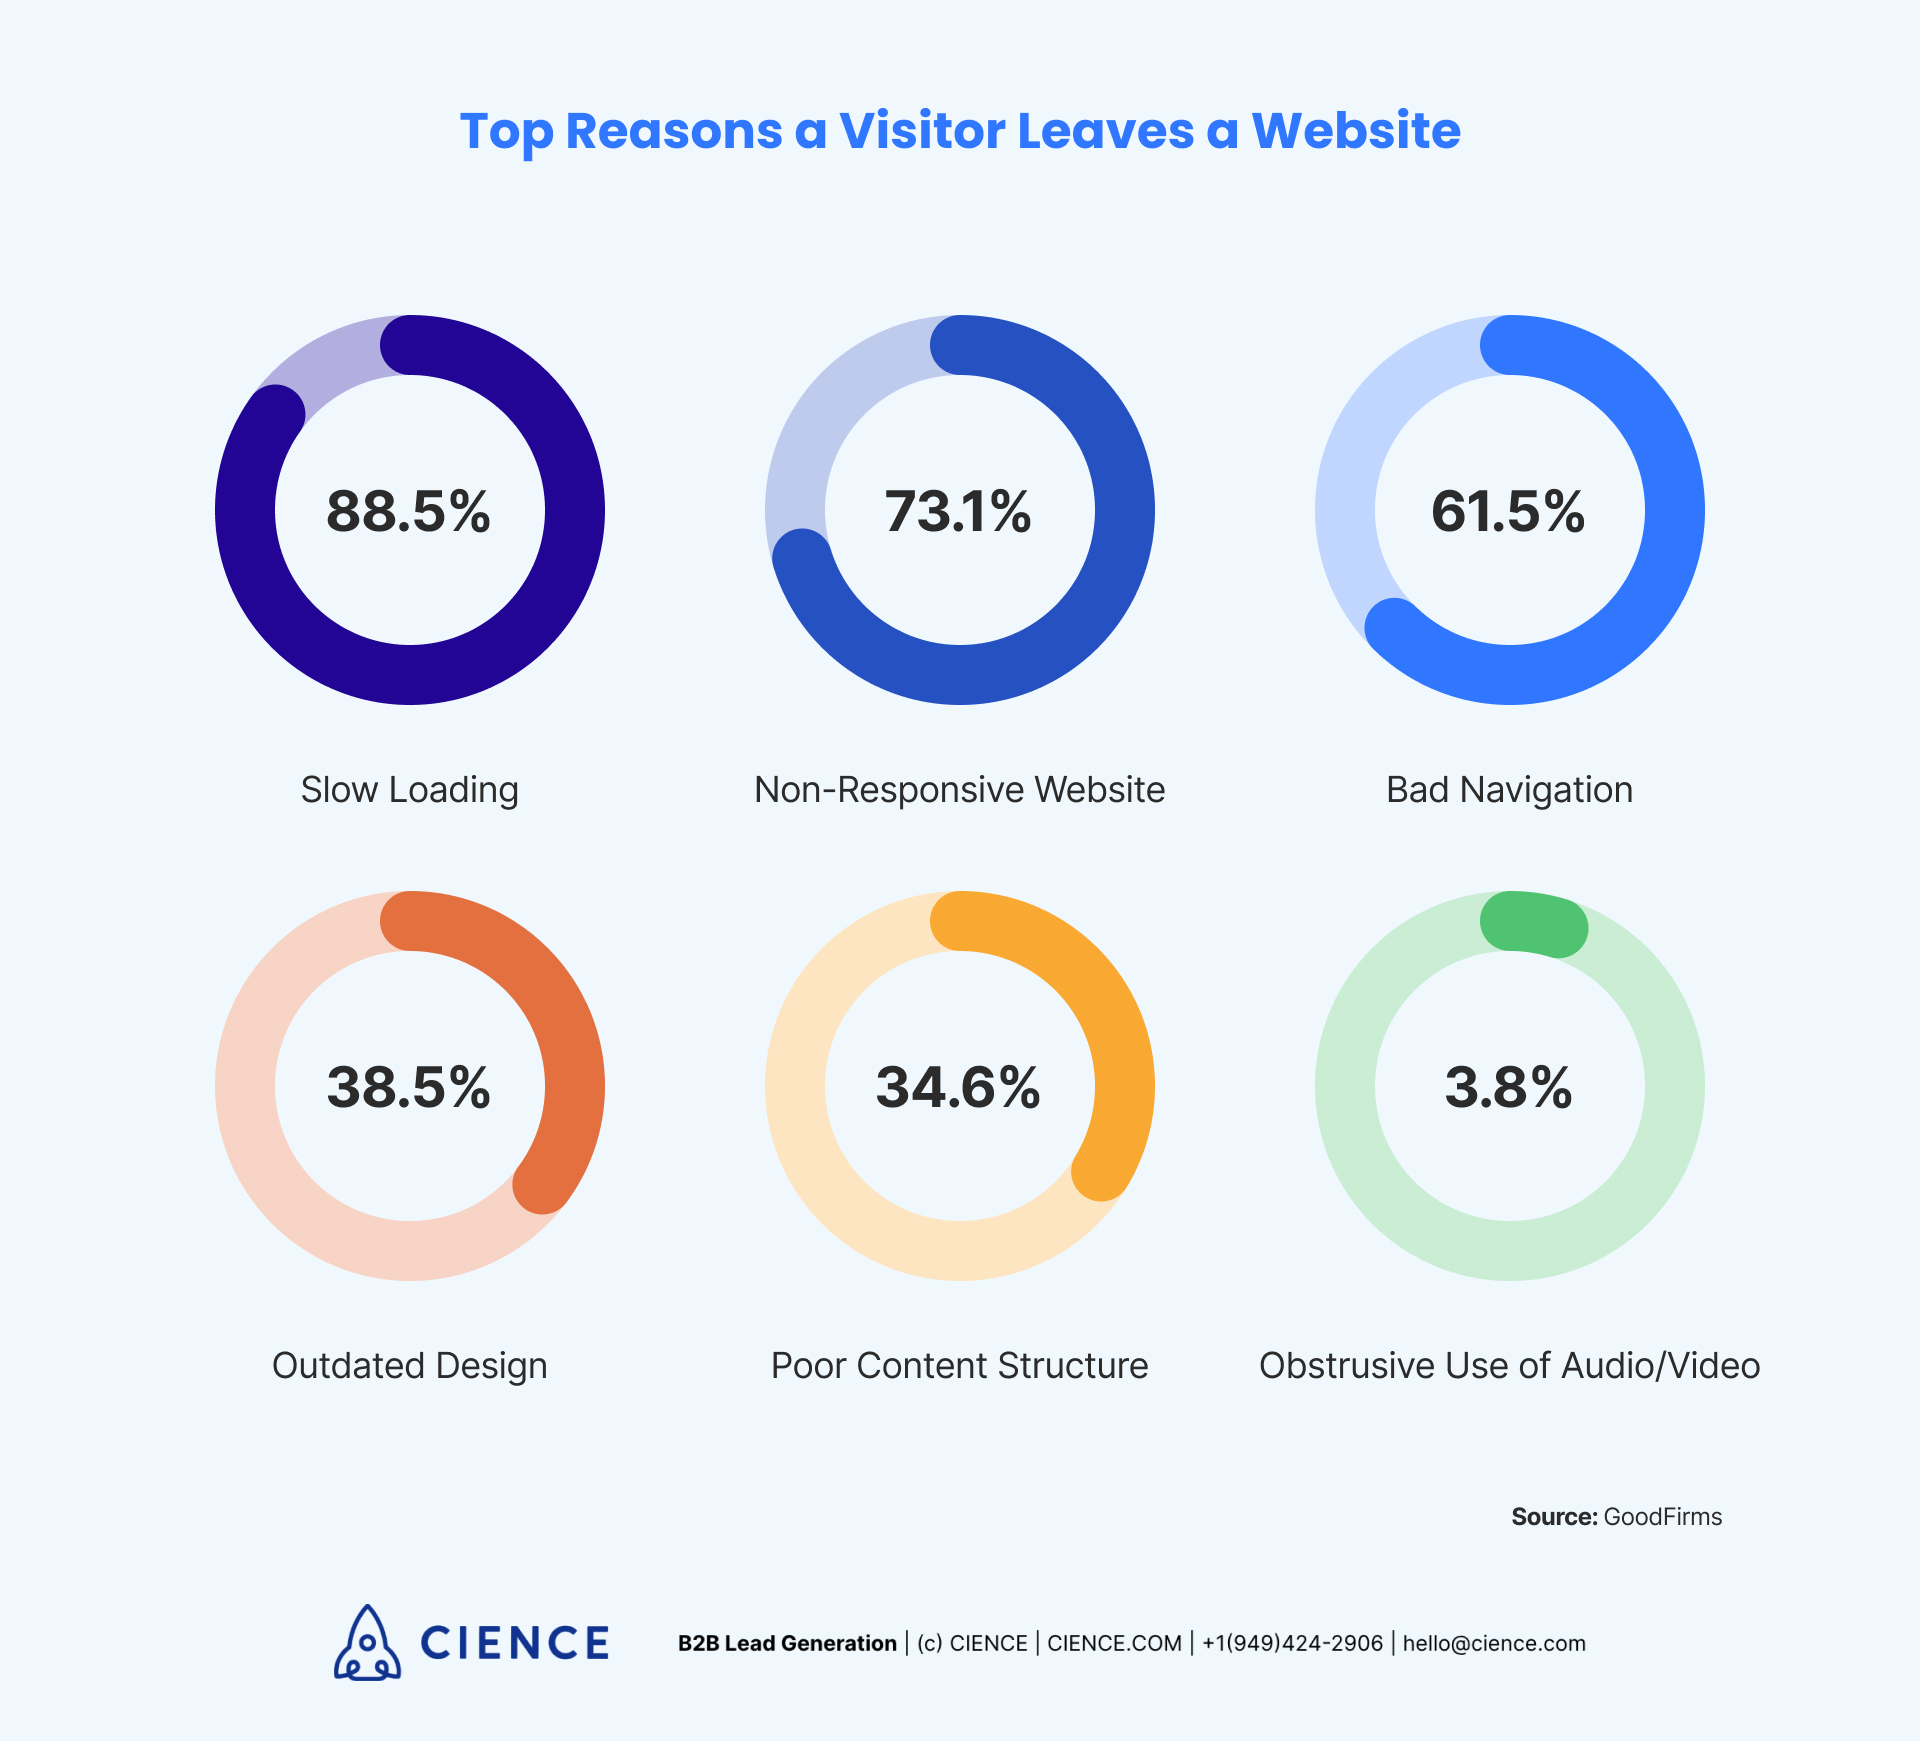 Top Reasons Why a Visitor Leaves a Website